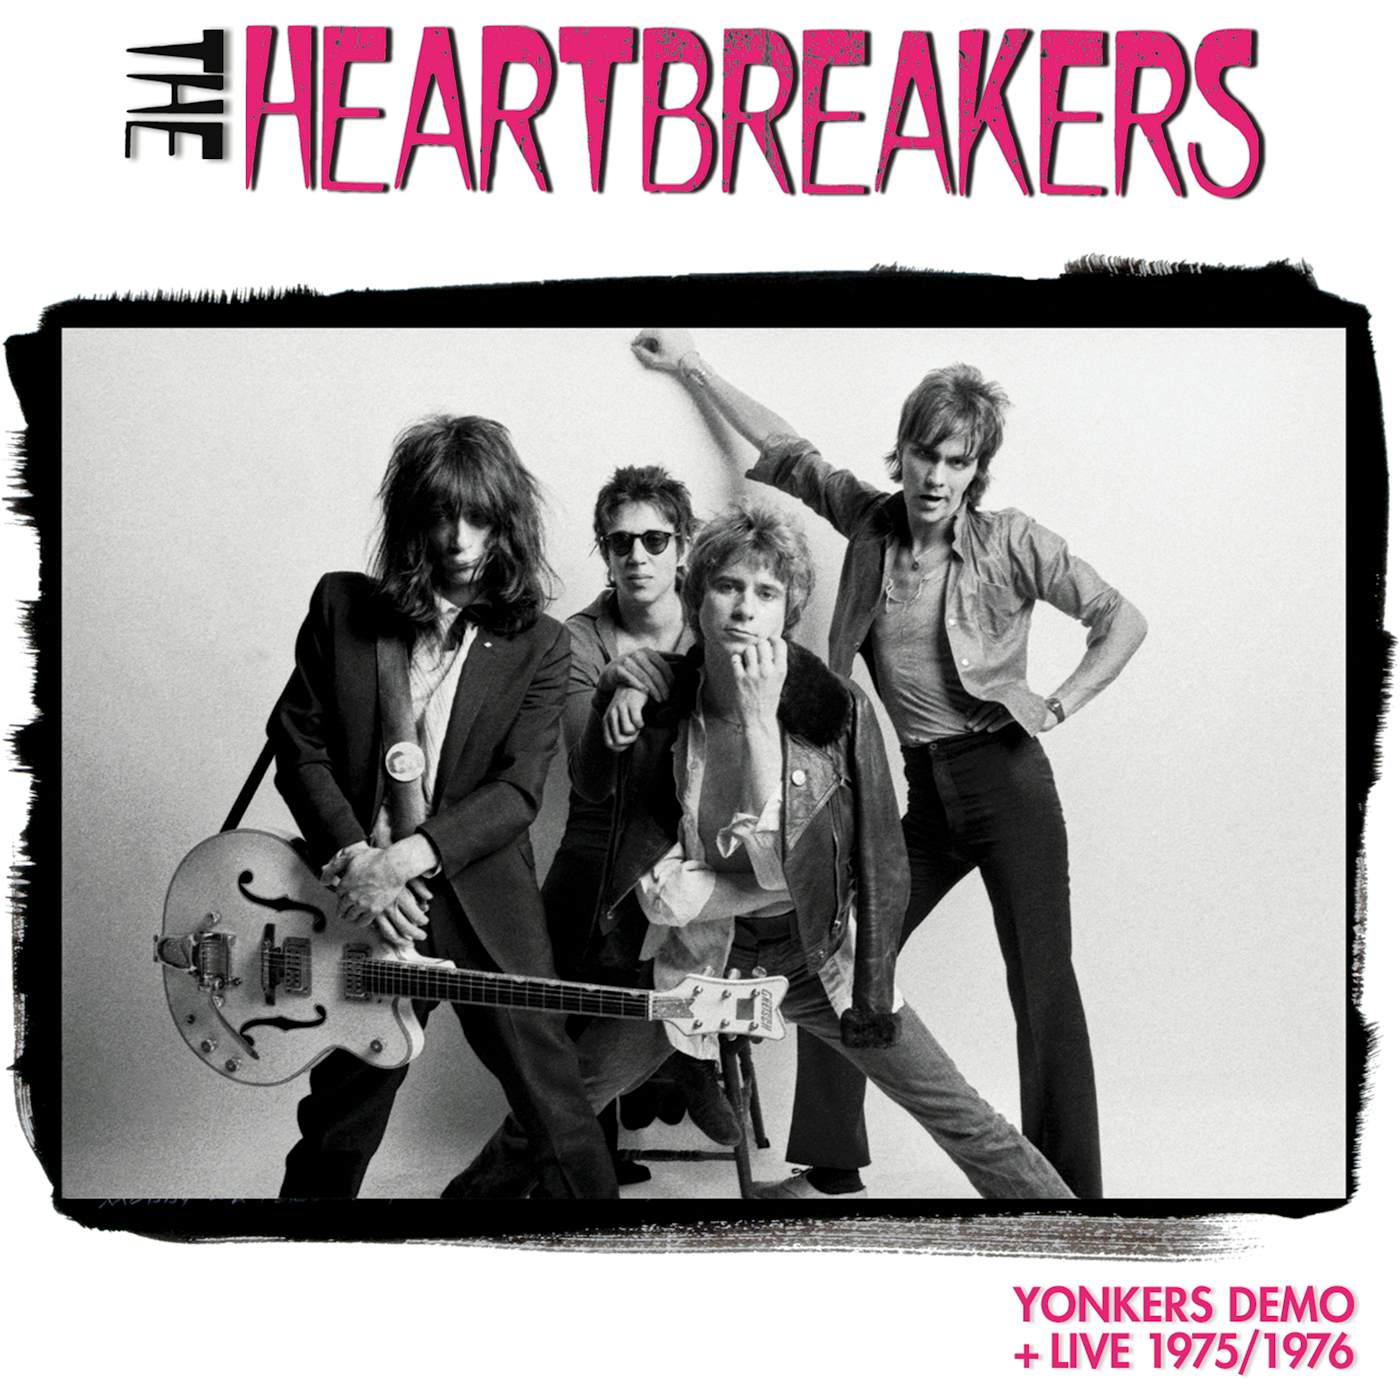 Johnny Thunders & The Heartbreakers YONKERS DEMO + LIVE 1975/1976 (2CD) CD